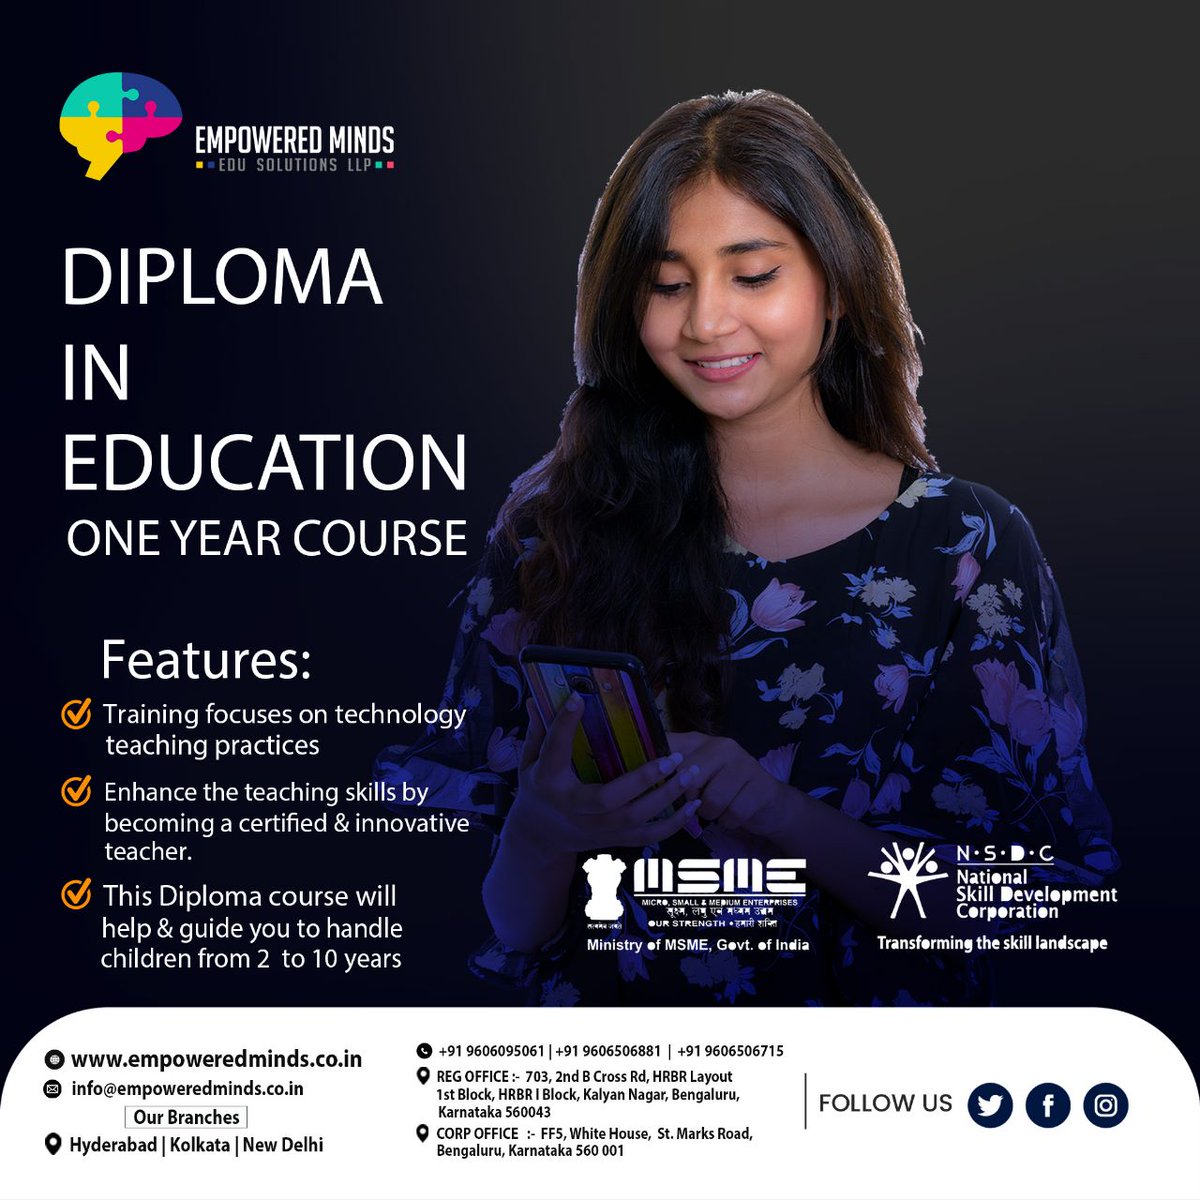 Diploma in Education: Enhance Your Teaching Skills with Innovative and Technology-Focused Training!
#Diploma #DiplomaCourses #diplomaclass  #partimejobs #fulltimejobs #tutuionteachers #tution #privatetution #onlinetution #offlinetution #jobs